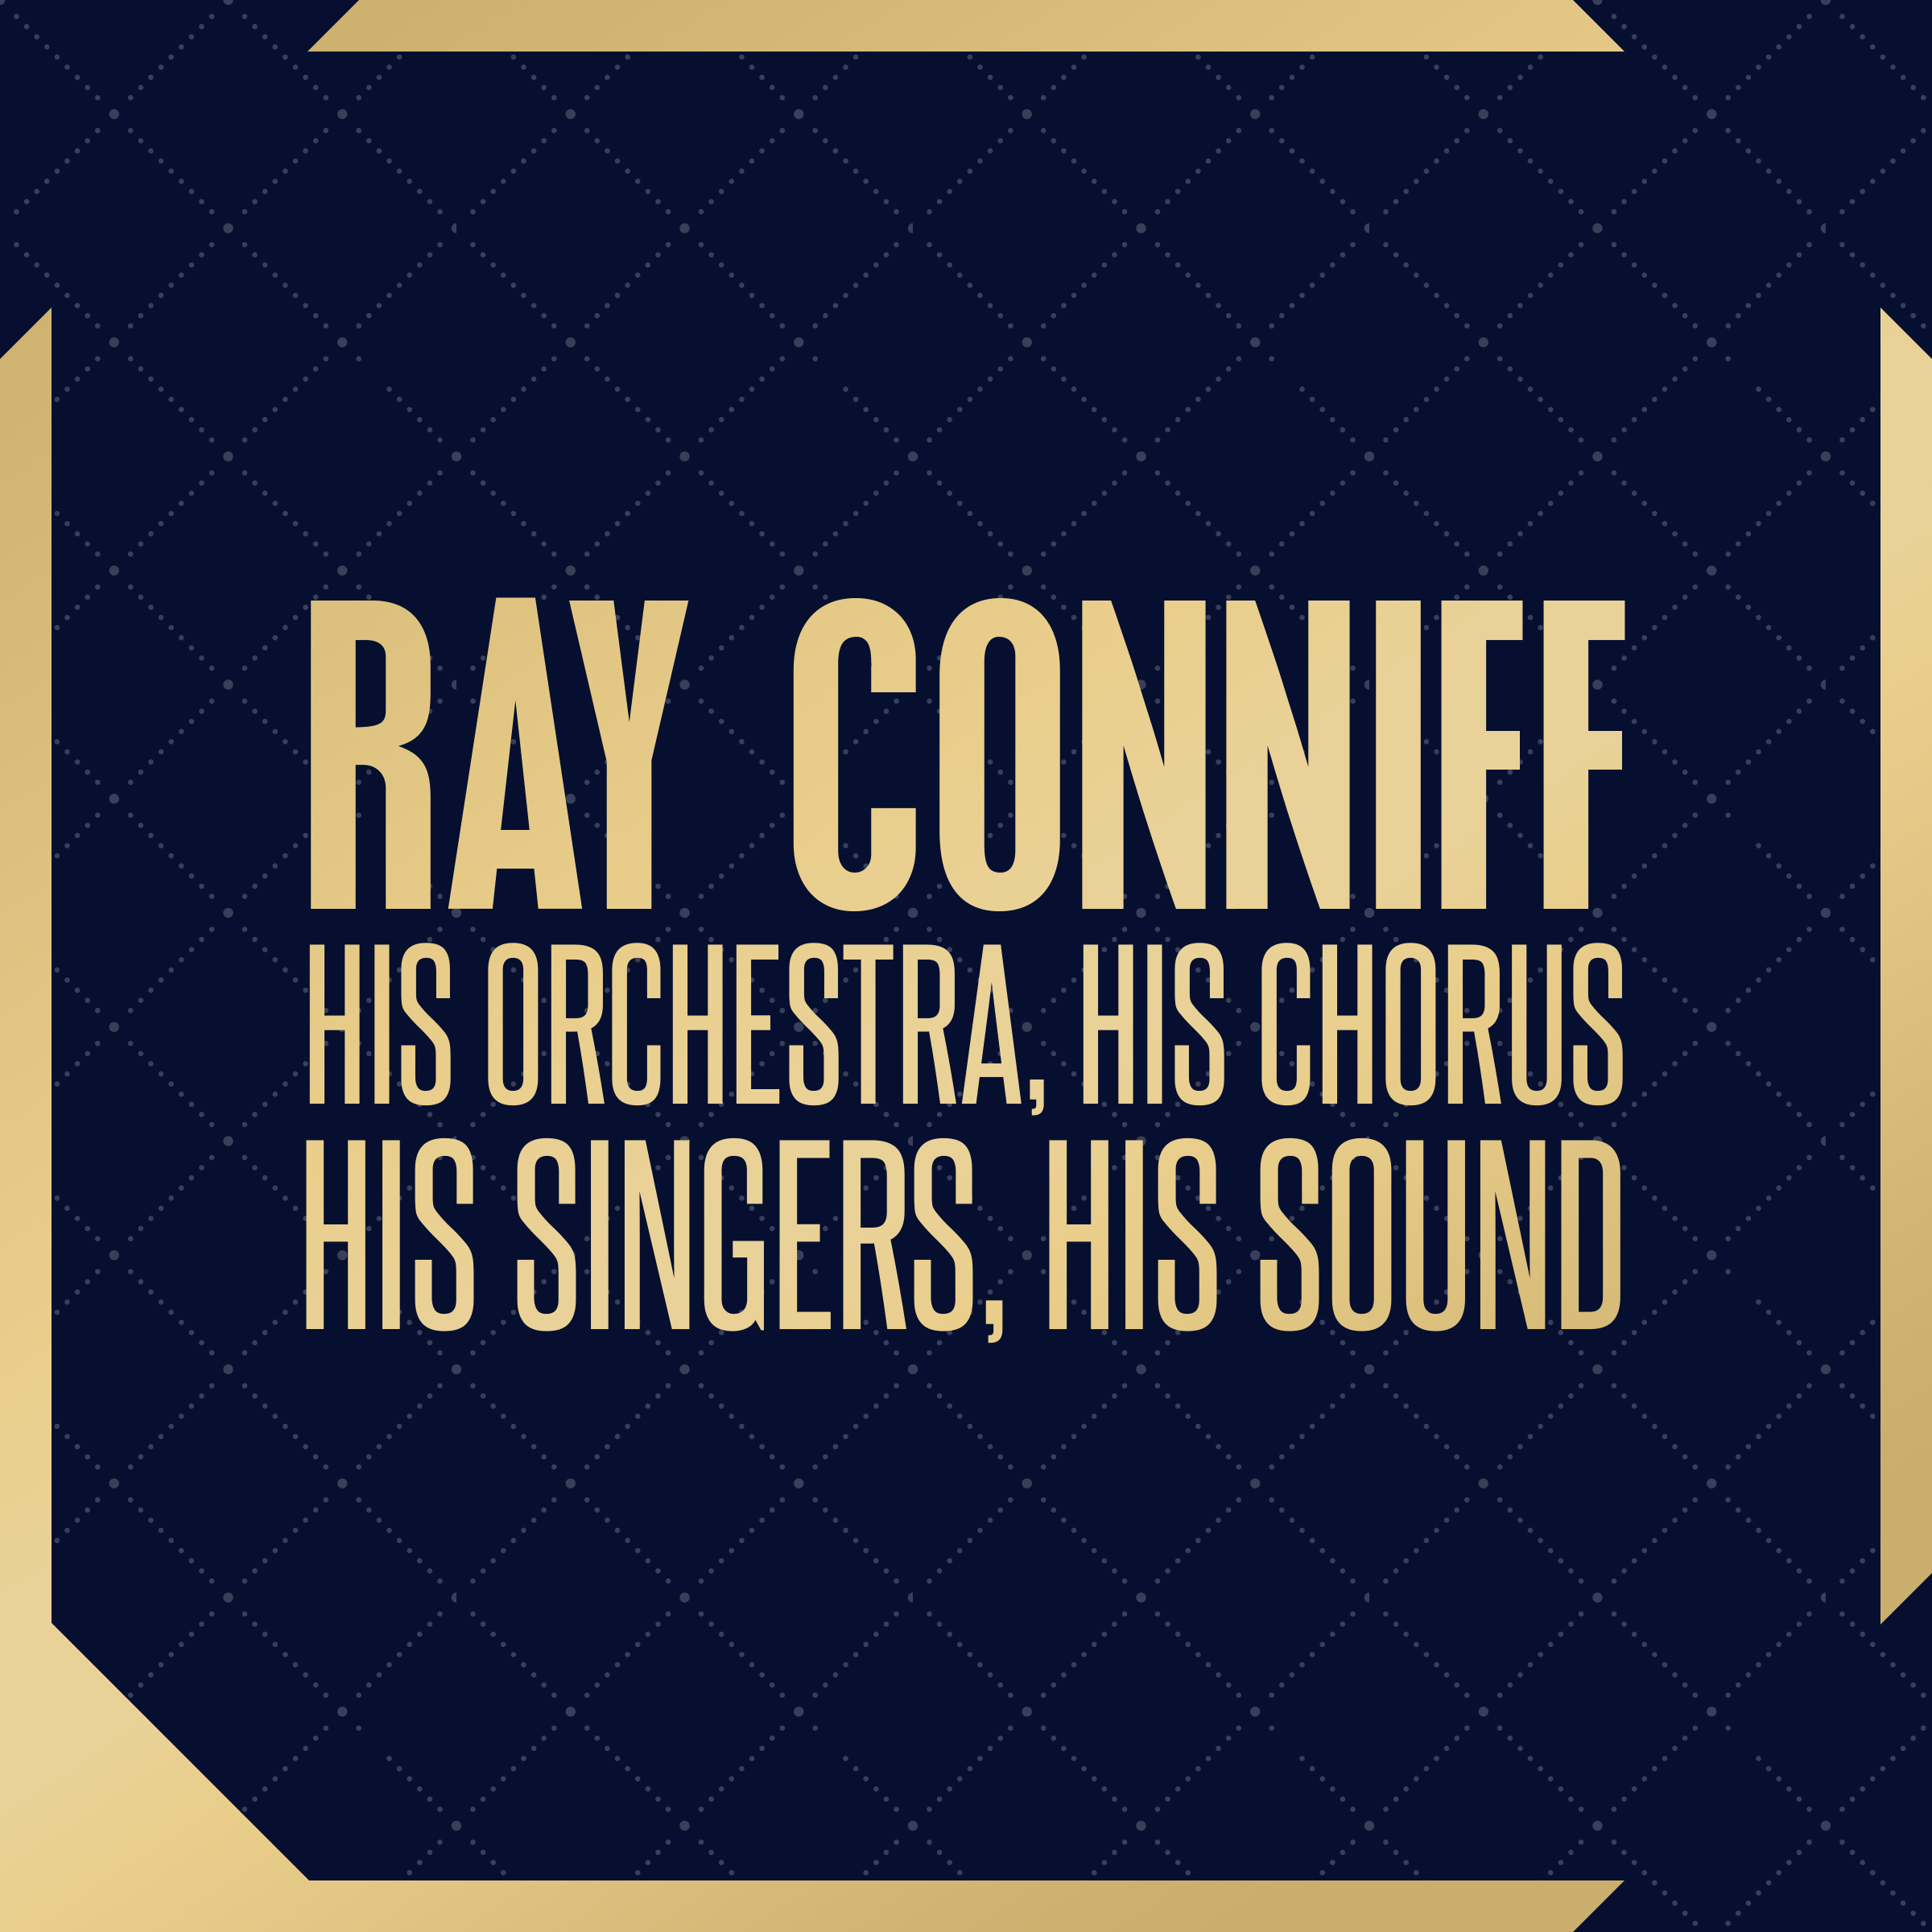 Early Evening (Theme From The Ray Conniff Suite)